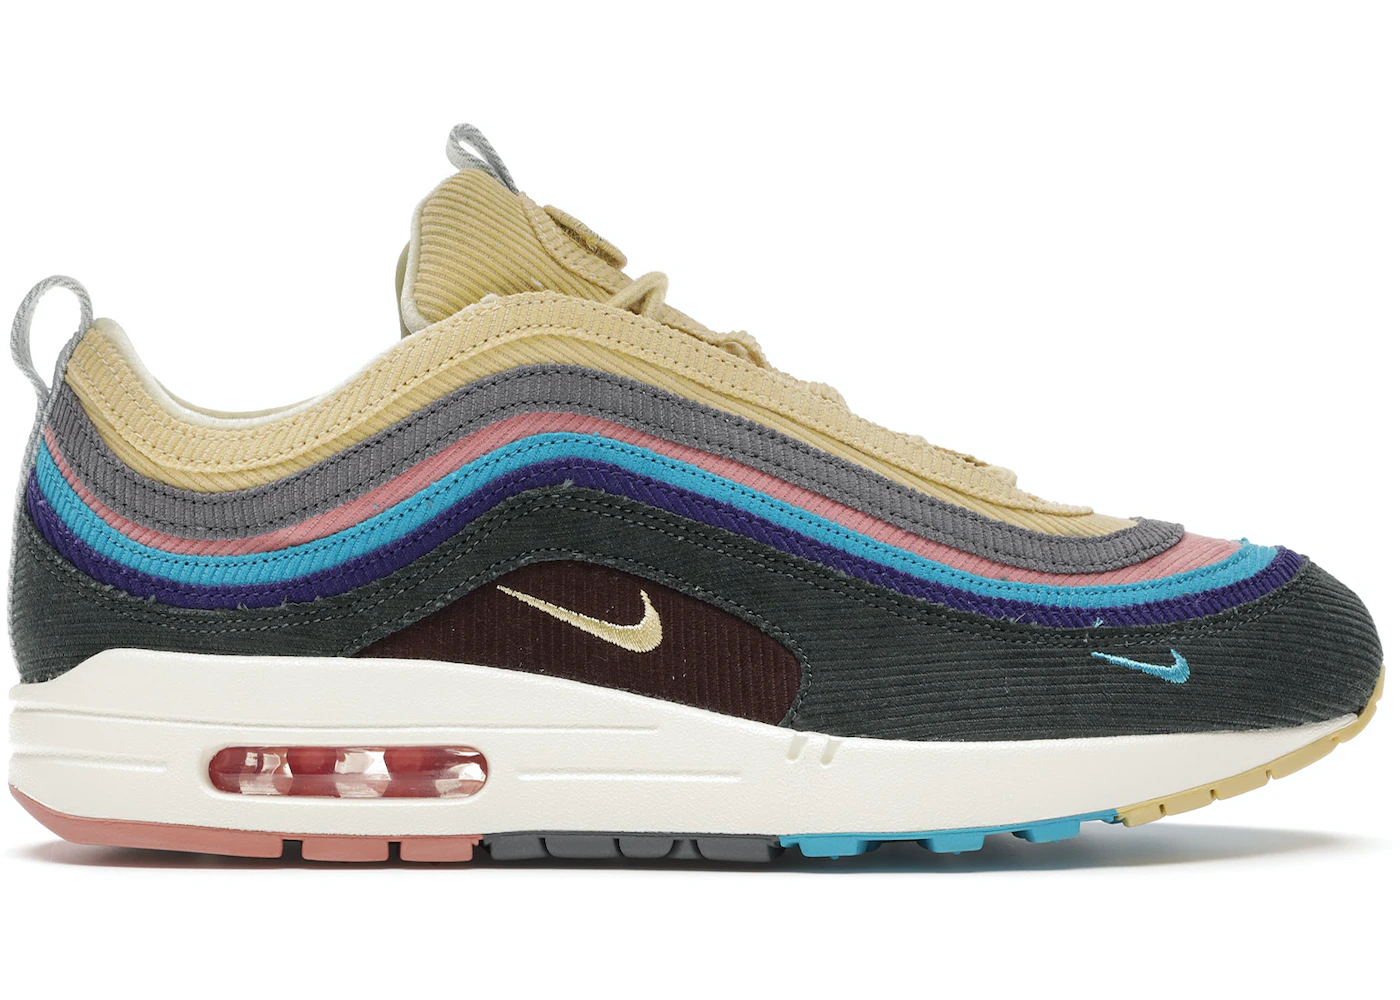 Rijden Vlak tuberculose Nike Air Max 1/97 Sean Wotherspoon (All Accessories and Dustbag) Men's -  AJ4219-400 - US